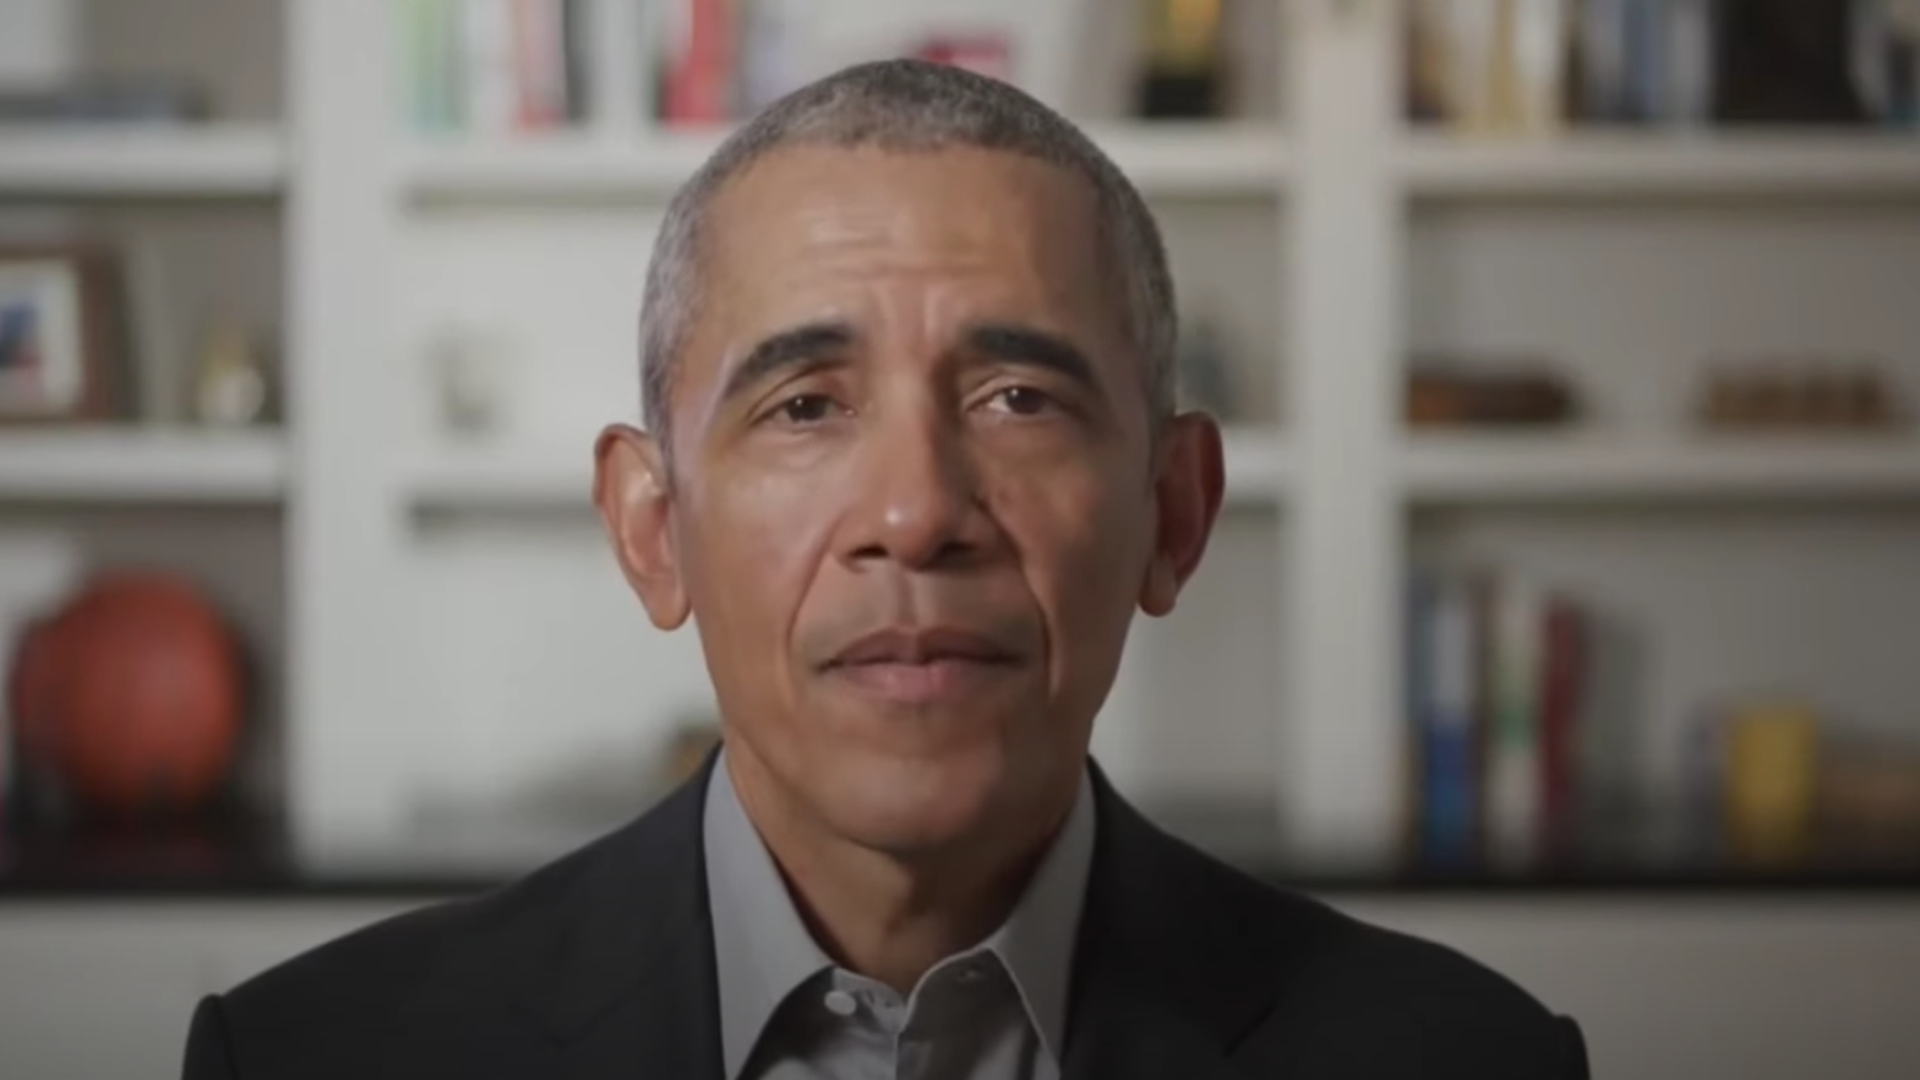 A screenshot of former President Obama's address during the "Show Me Your Walk H.B.C.U. Edition."